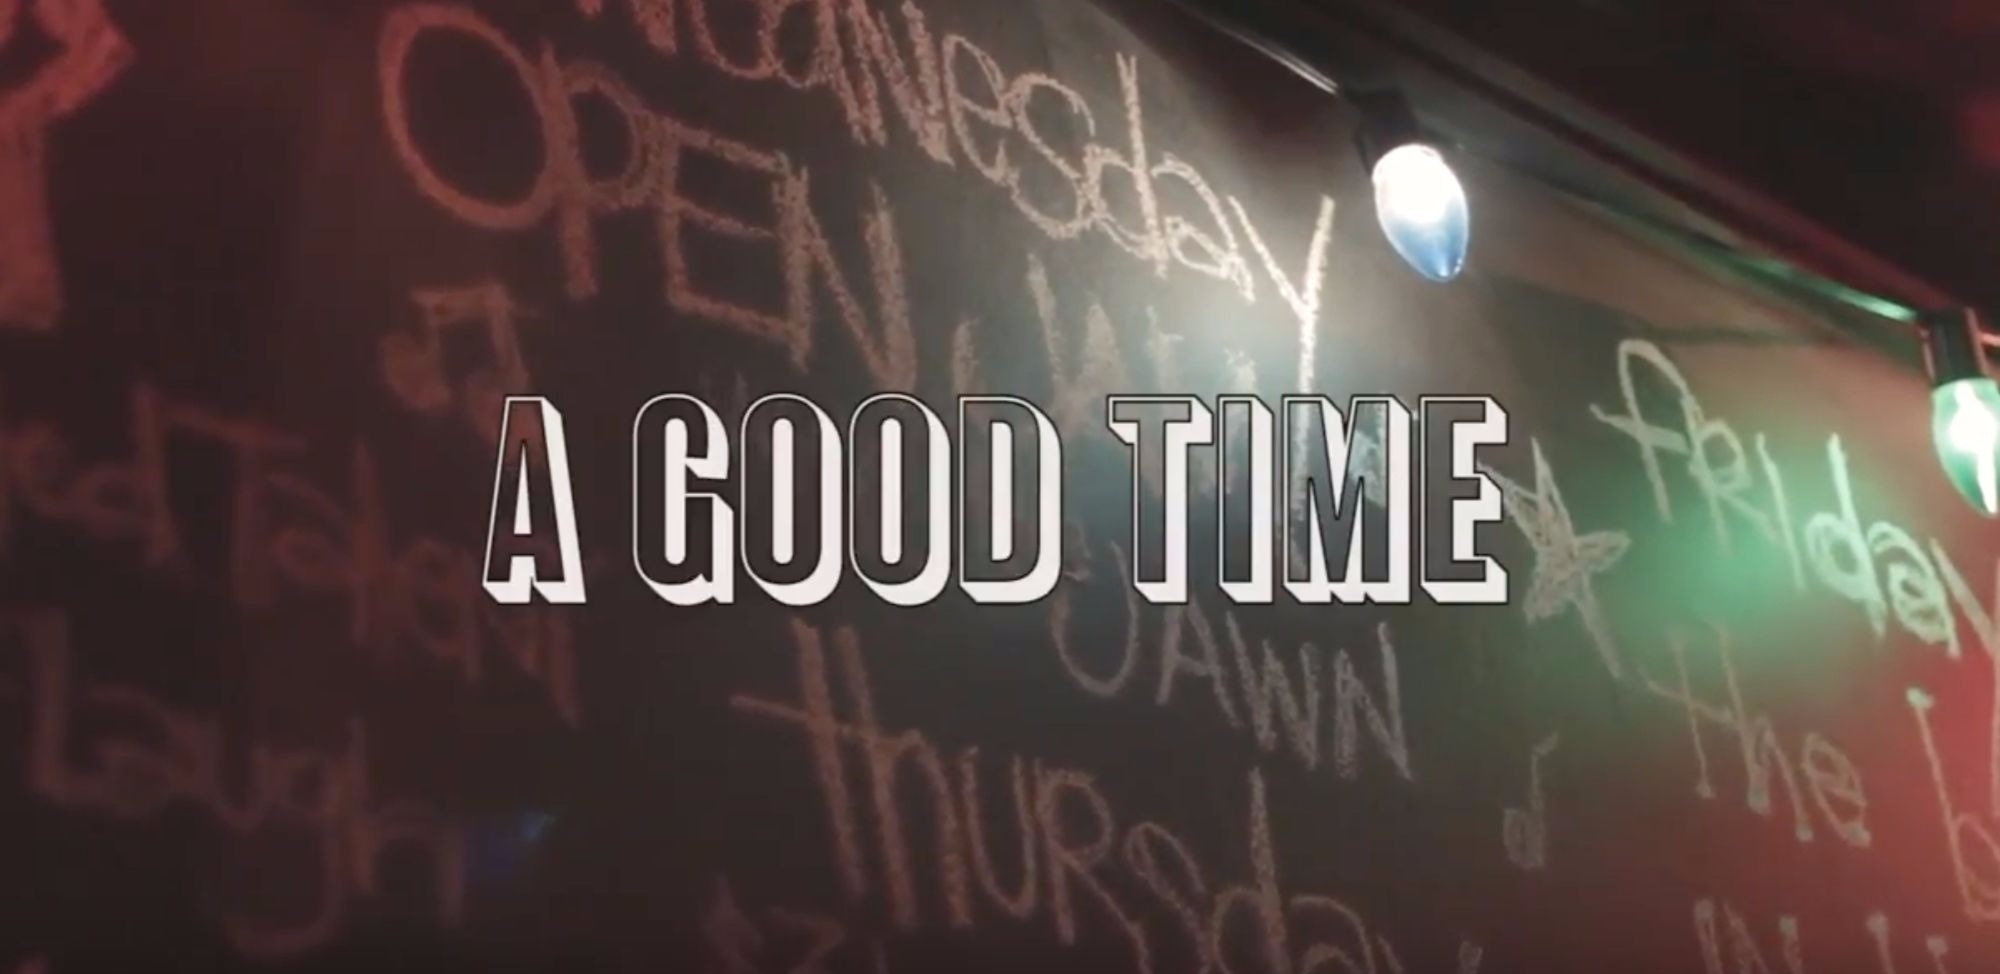 Good Time - The Jawn